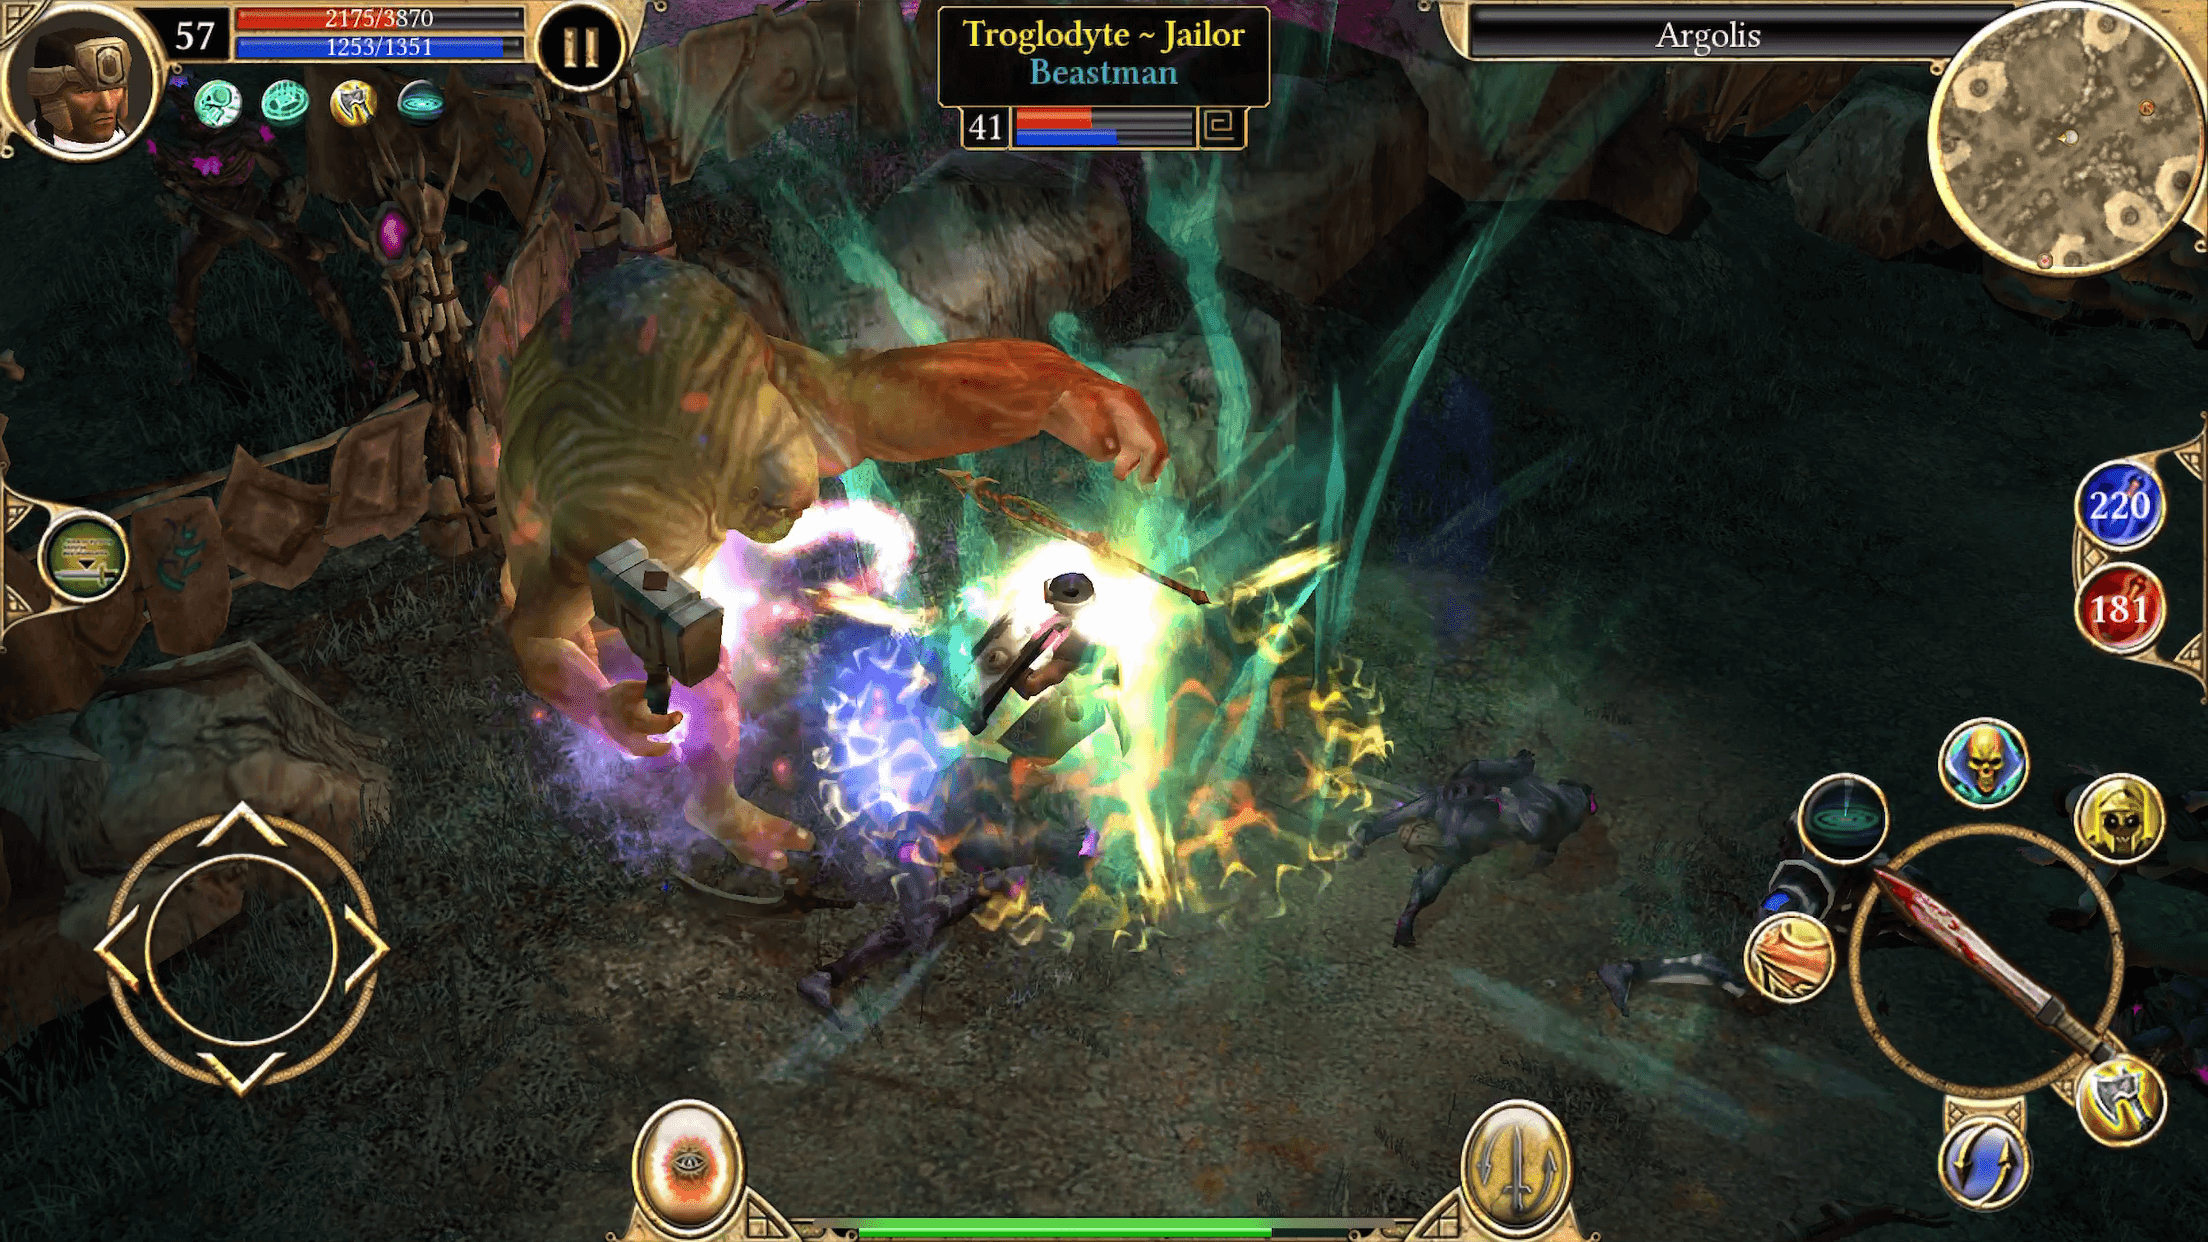 Titan Quest: Legendary Edition // Out now on Android 